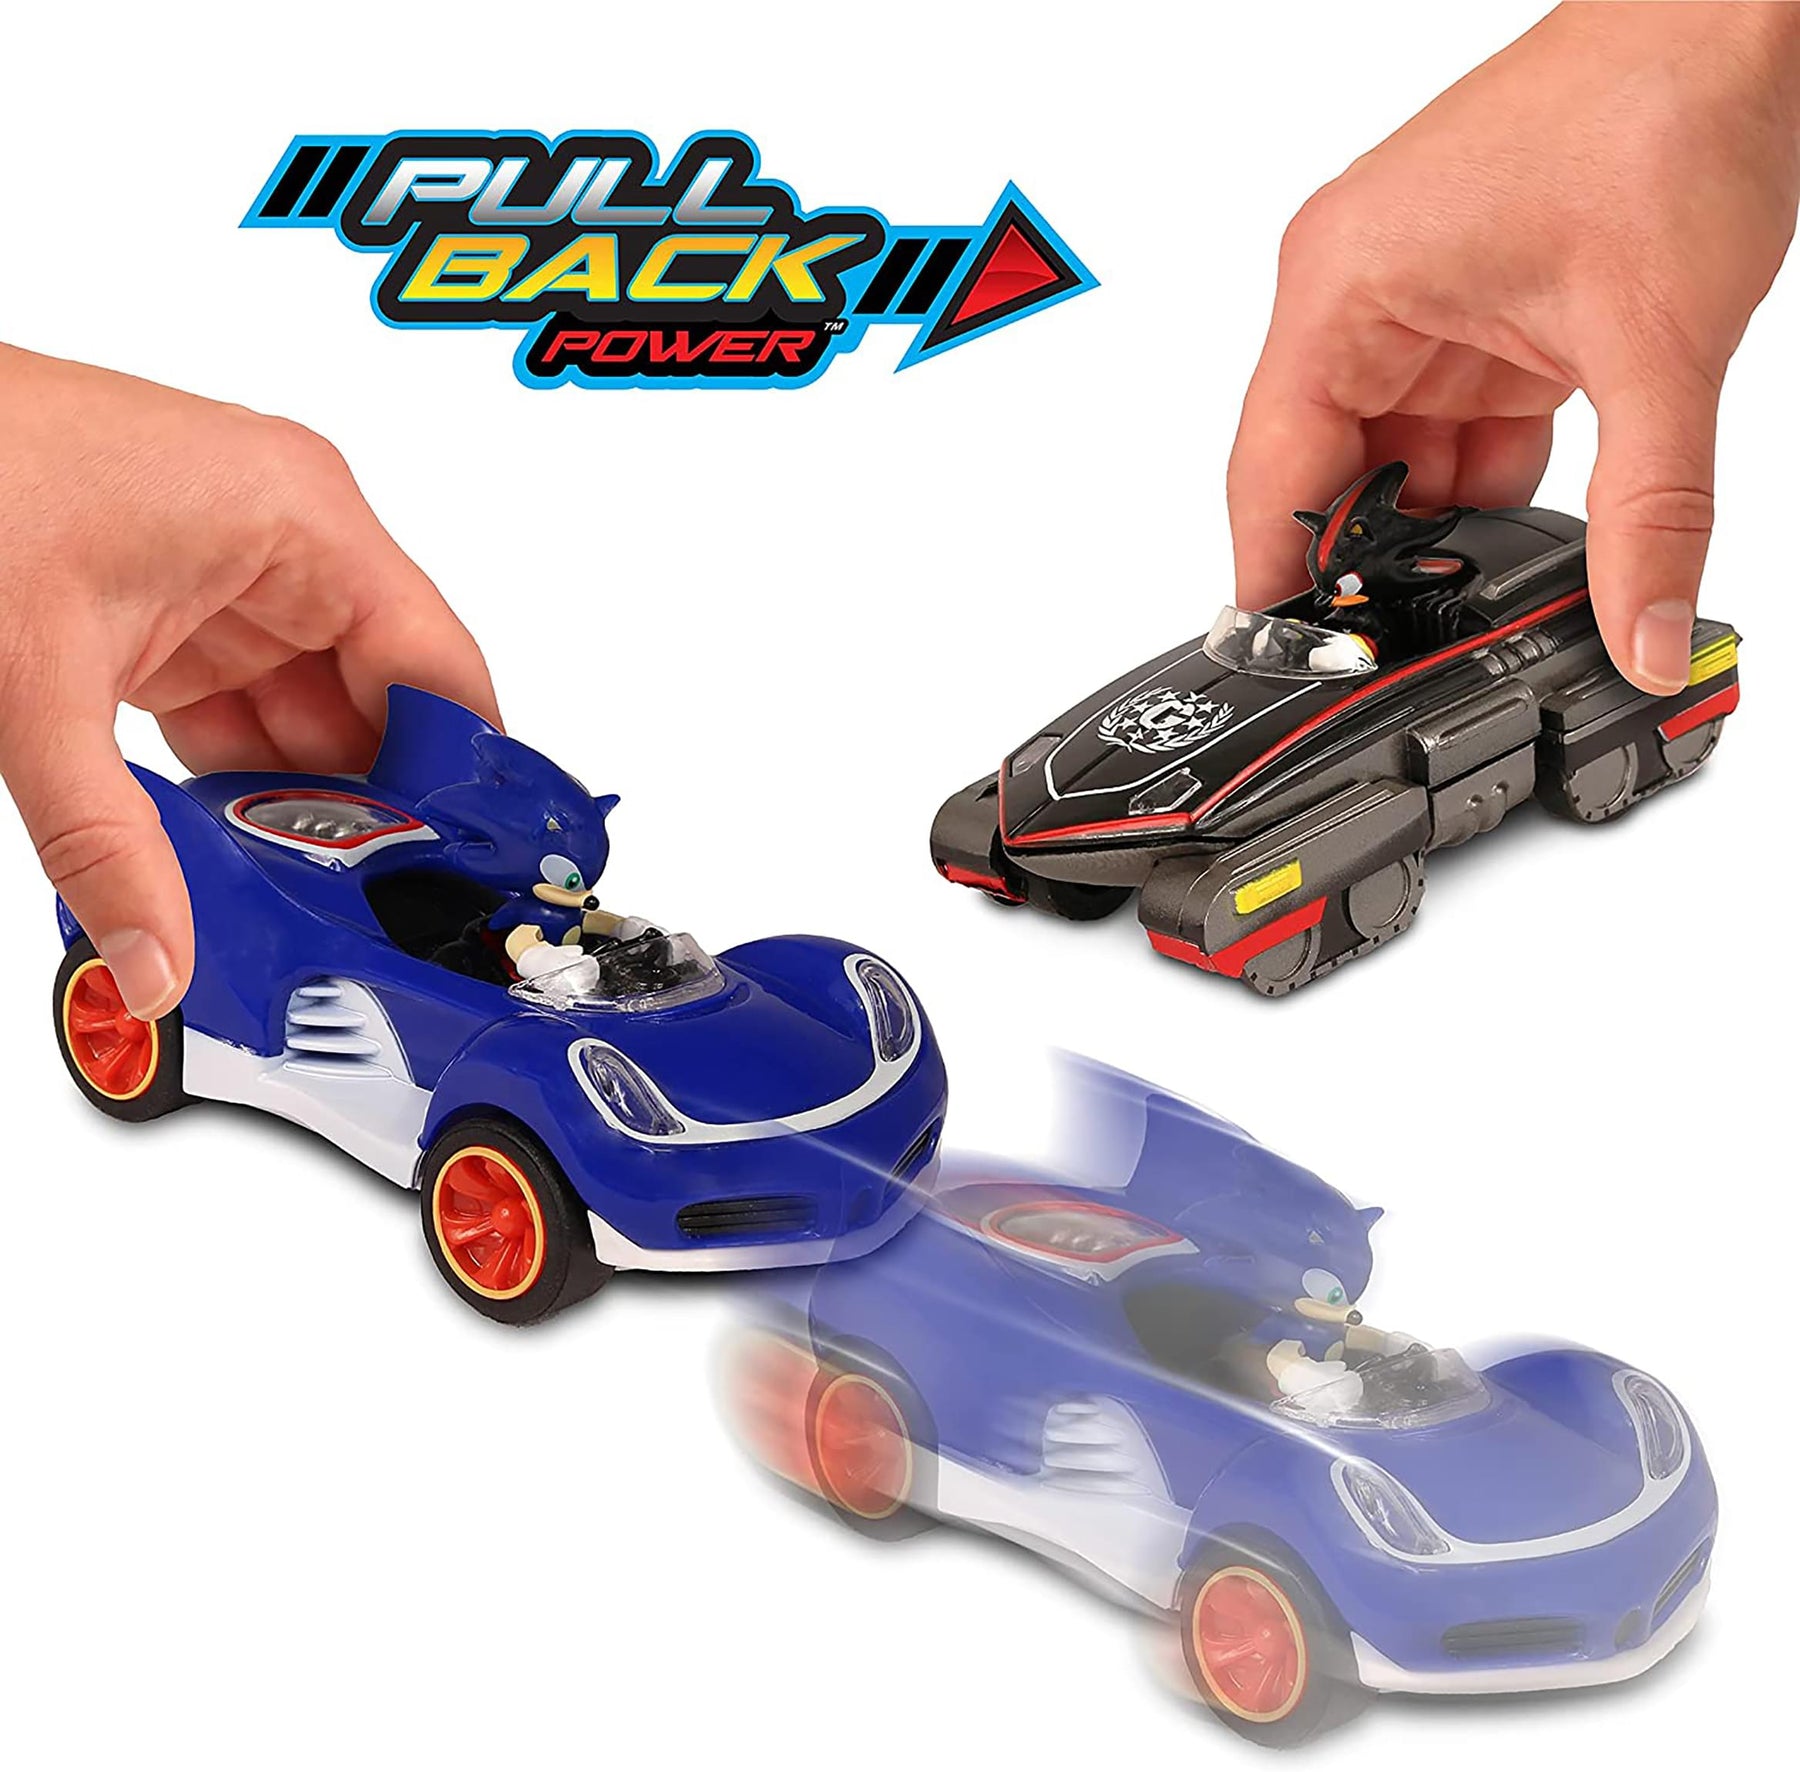 Sonic the Hedgehog Pull Back Racers | Sonic & Shadow